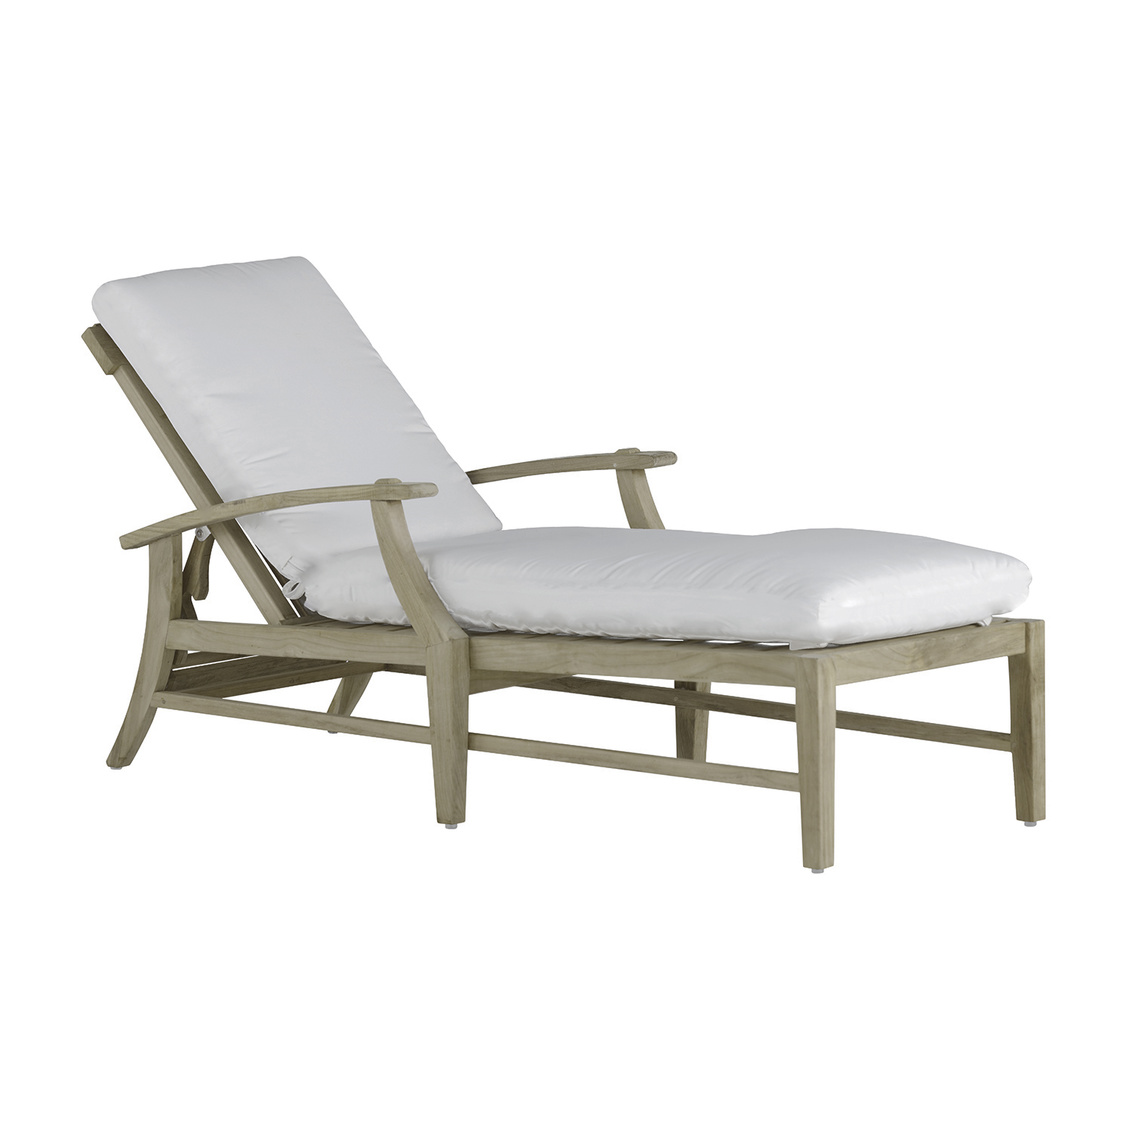 croquet teak chaise in oyster teak – frame only product image